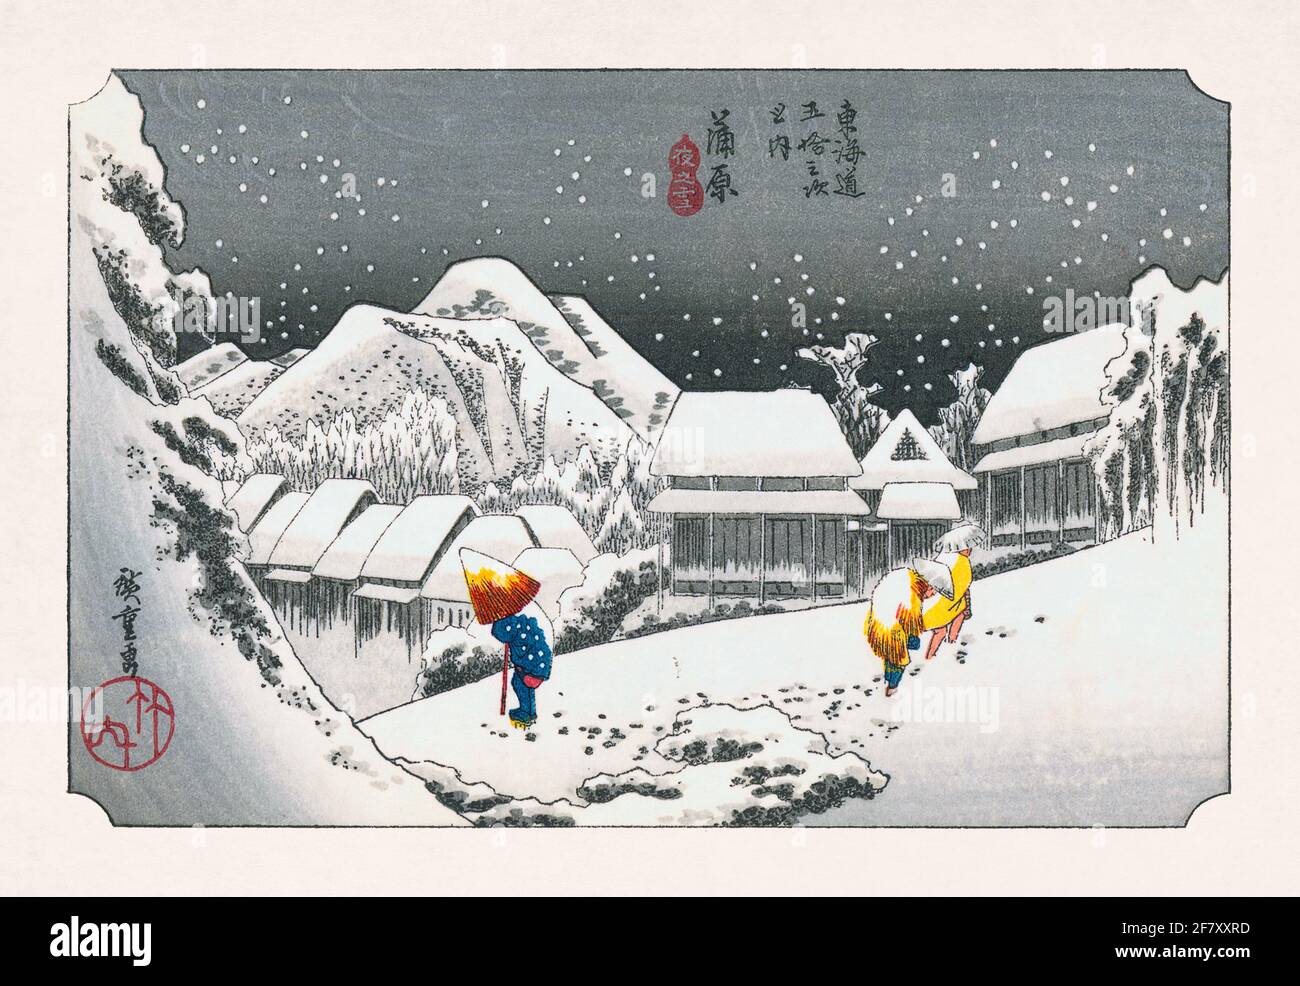 Illustration of Kanbara in the snow by Utagawa Hiroshige published in 1832. Stock Photo